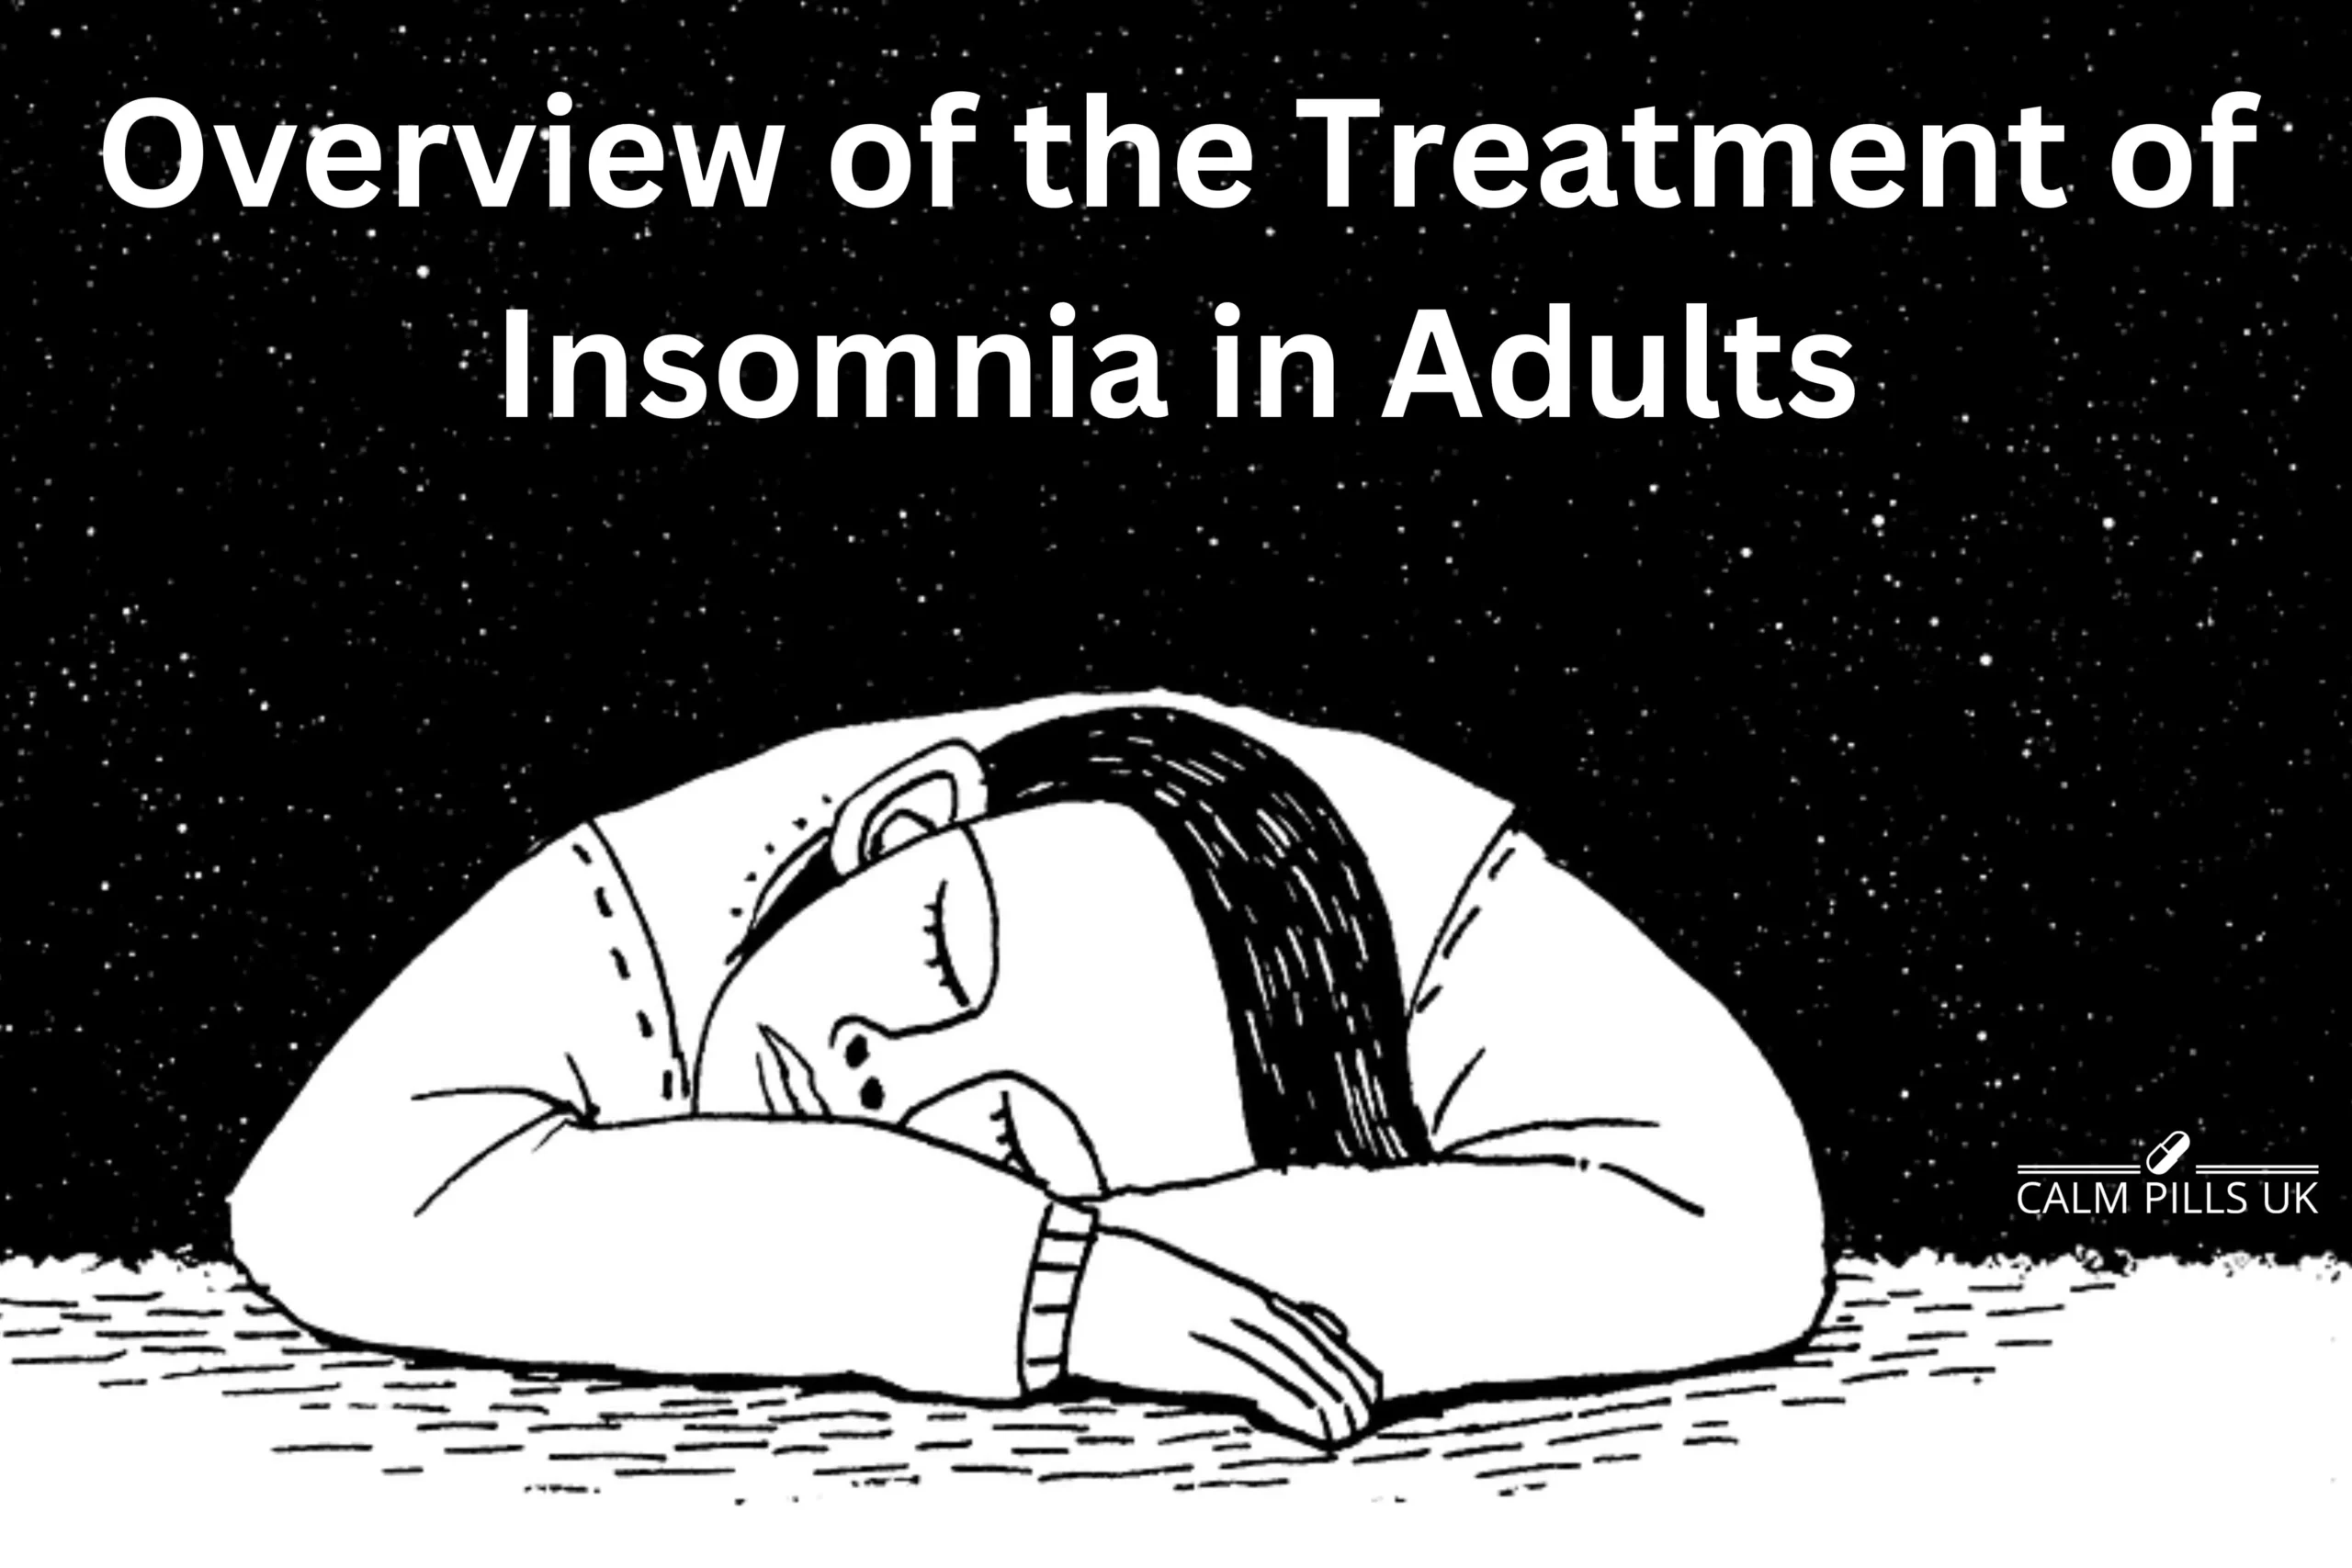 Overview of the Treatment of Insomnia in Adults